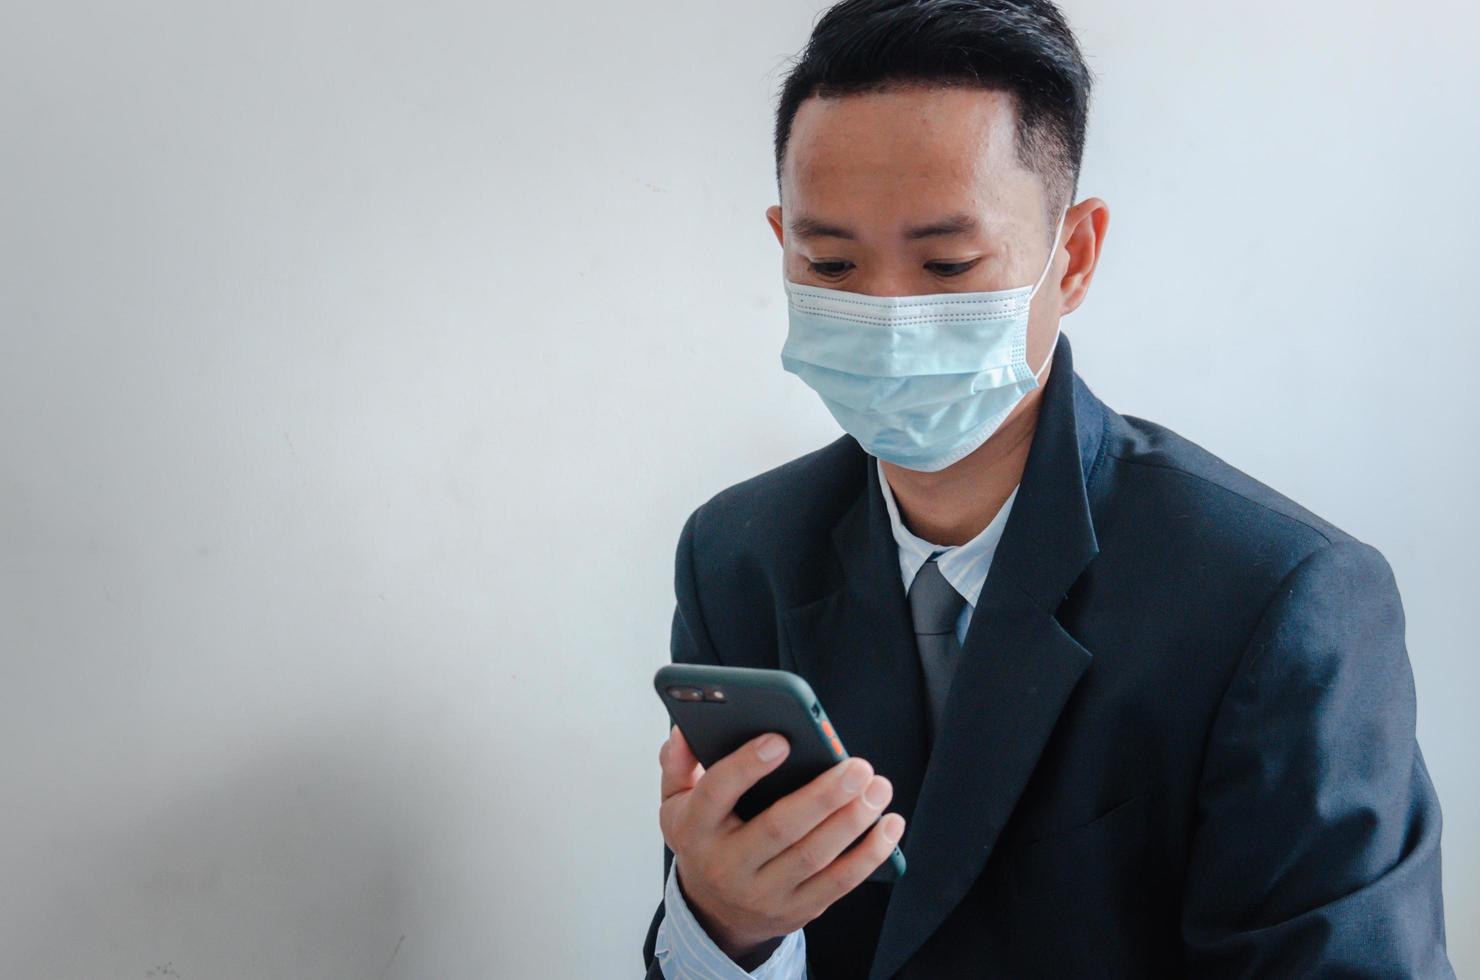 Business men wear face masks to watch mobile phone photo